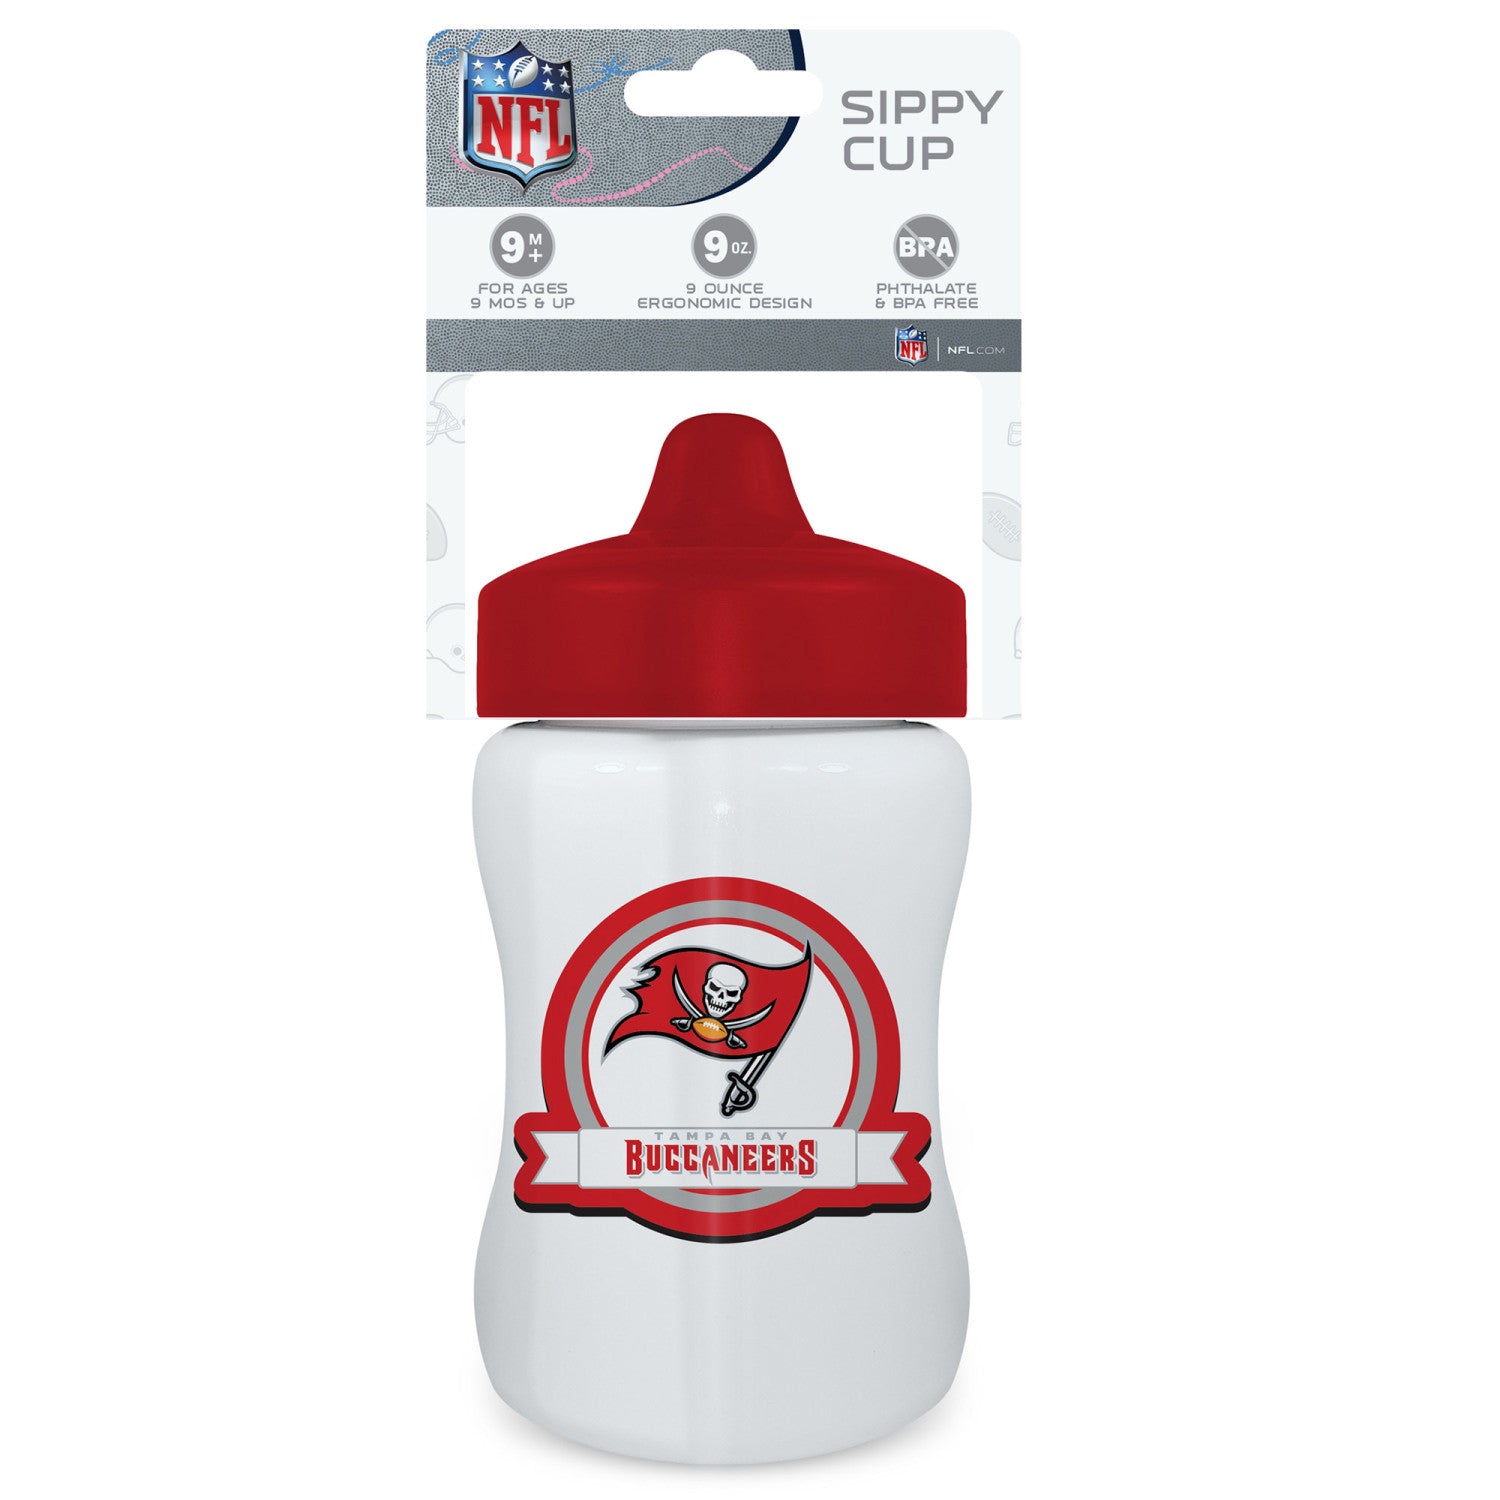 Tampa Bay Buccaneers NFL Sippy Cup